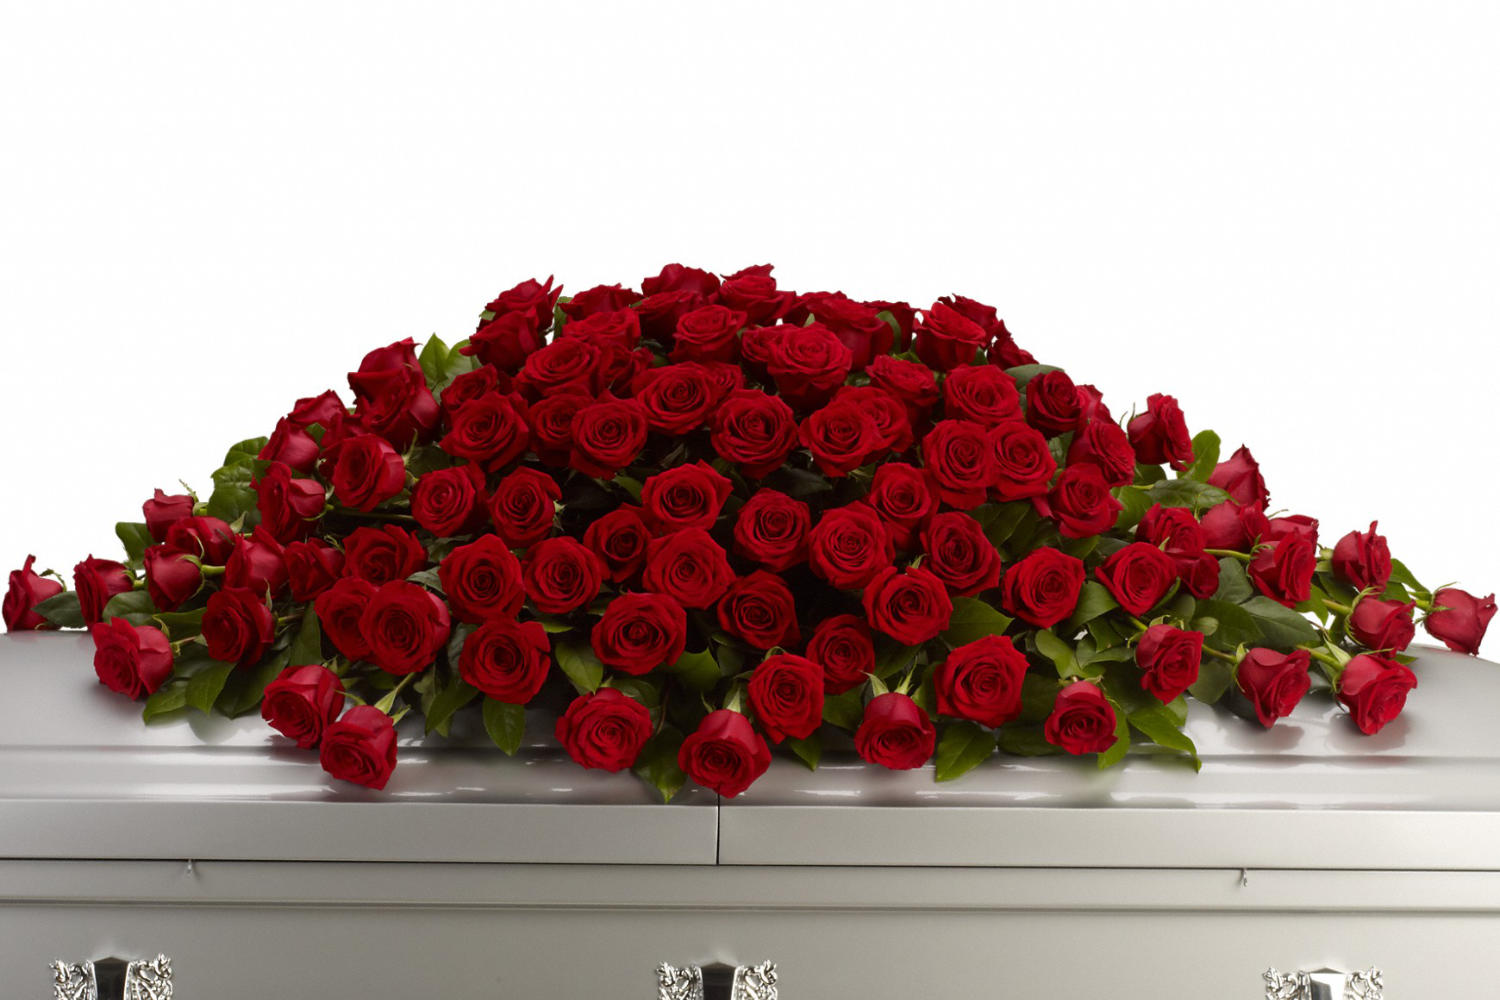 Funeral flowers, A loving embrace of rich, regal roses in an all-red spray to adorn a grey metallic casket.  A full spray of crimson roses, alternating large with slightly smaller roses